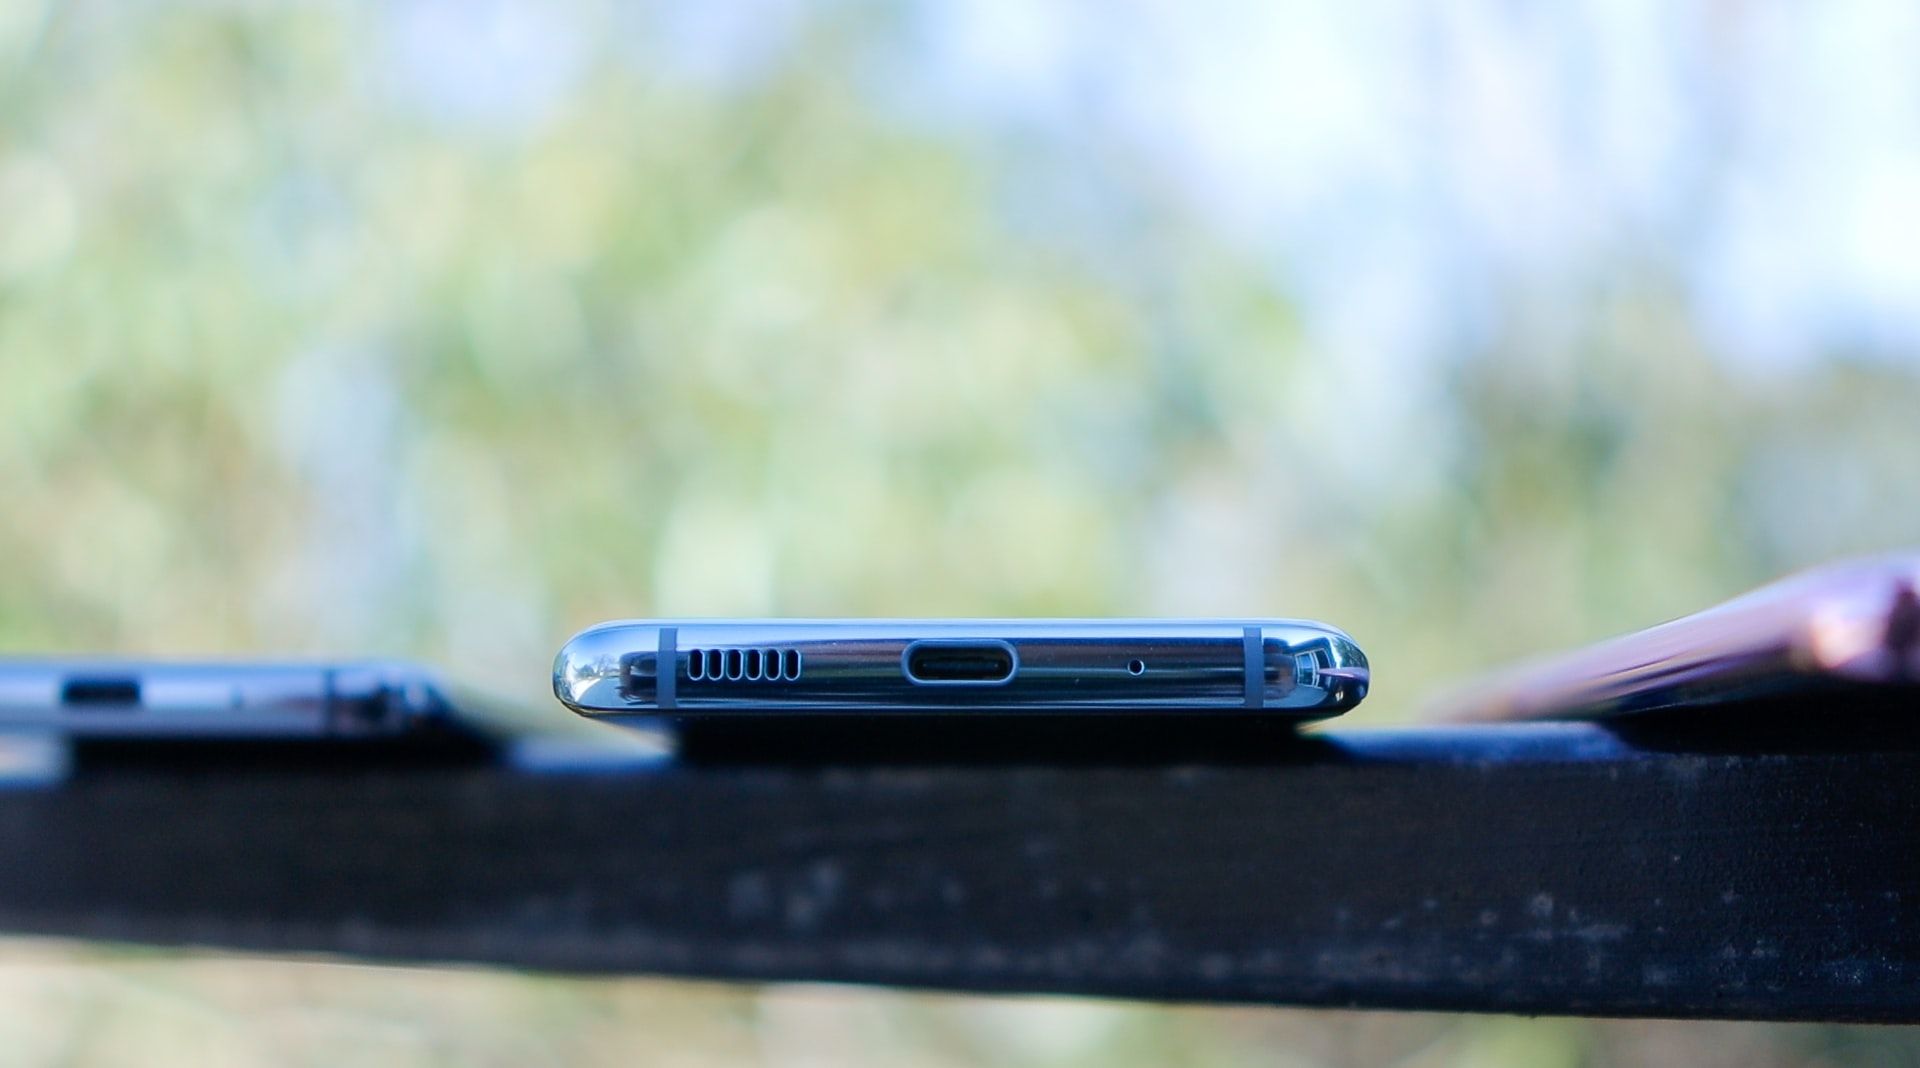 USB and 3.5mm ports on a smartphone